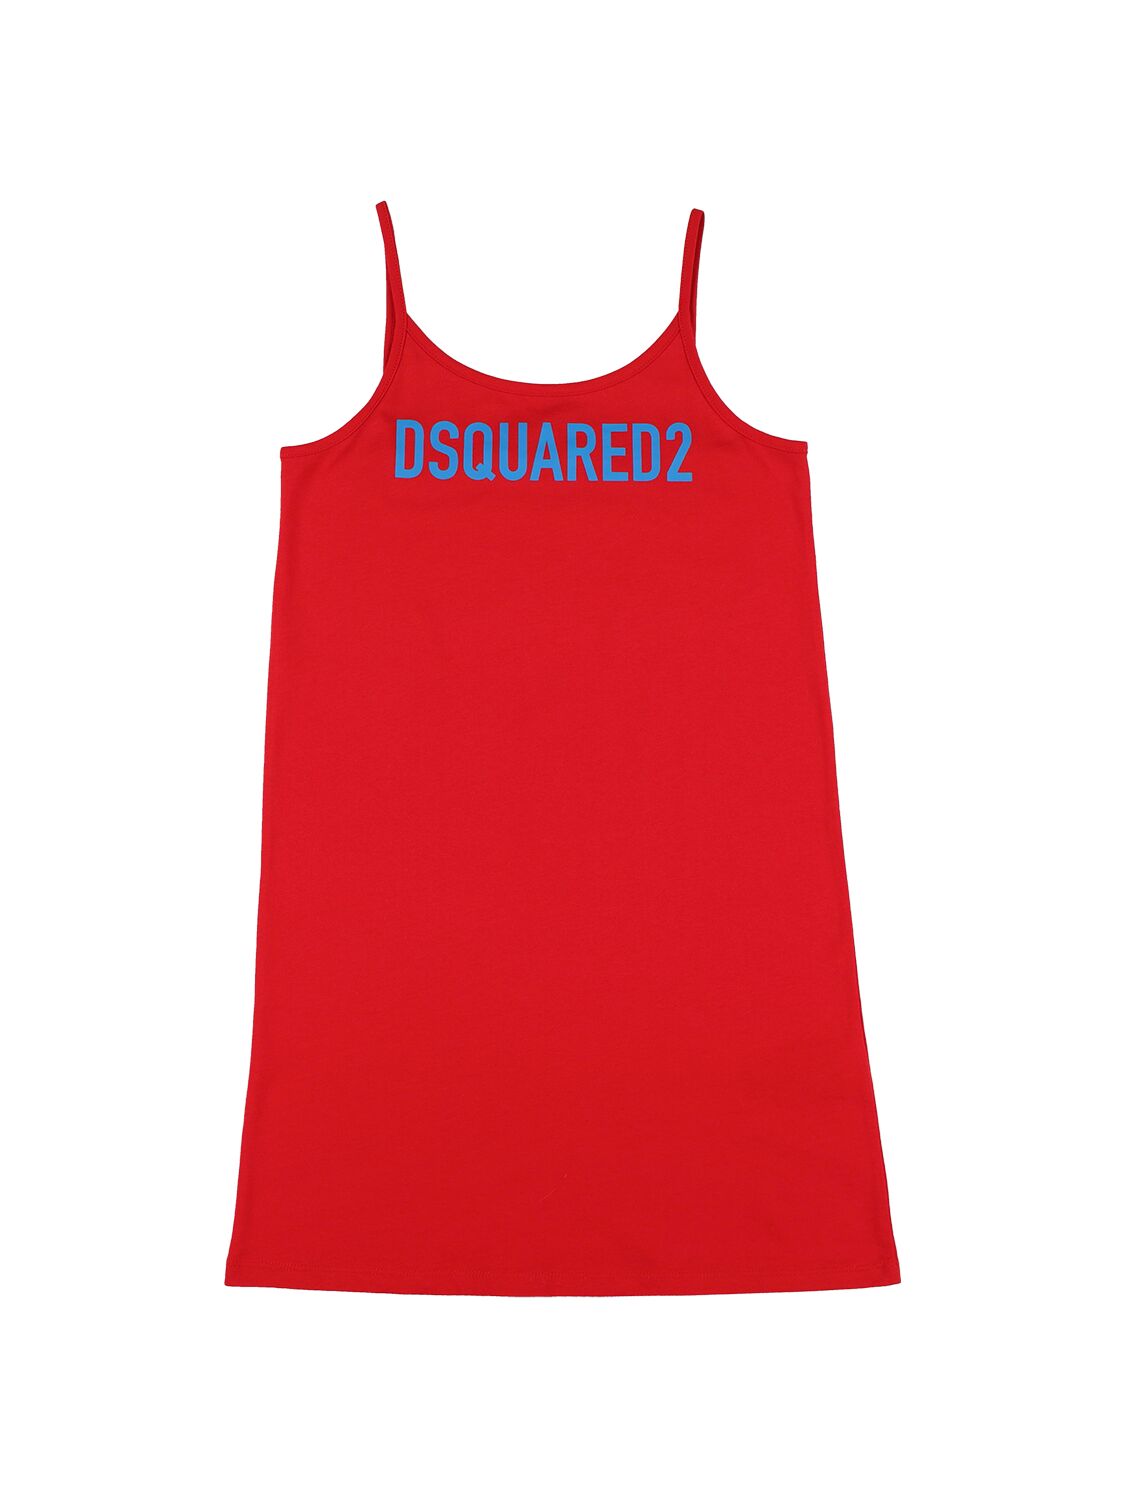 Dsquared2 Kids' Logo Print Cotton Jersey Tank Dress In Red